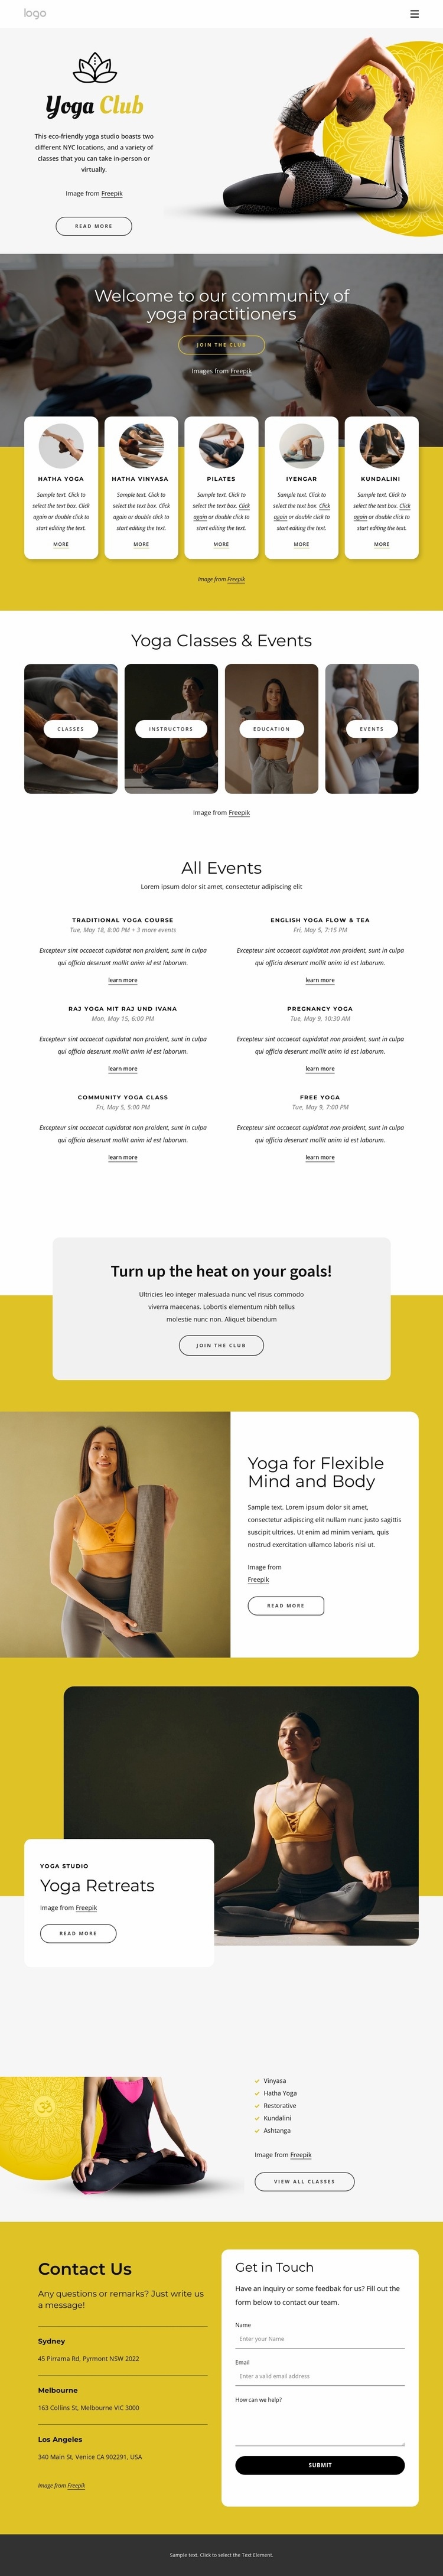 100 weekly in-studio classes Squarespace Template Alternative